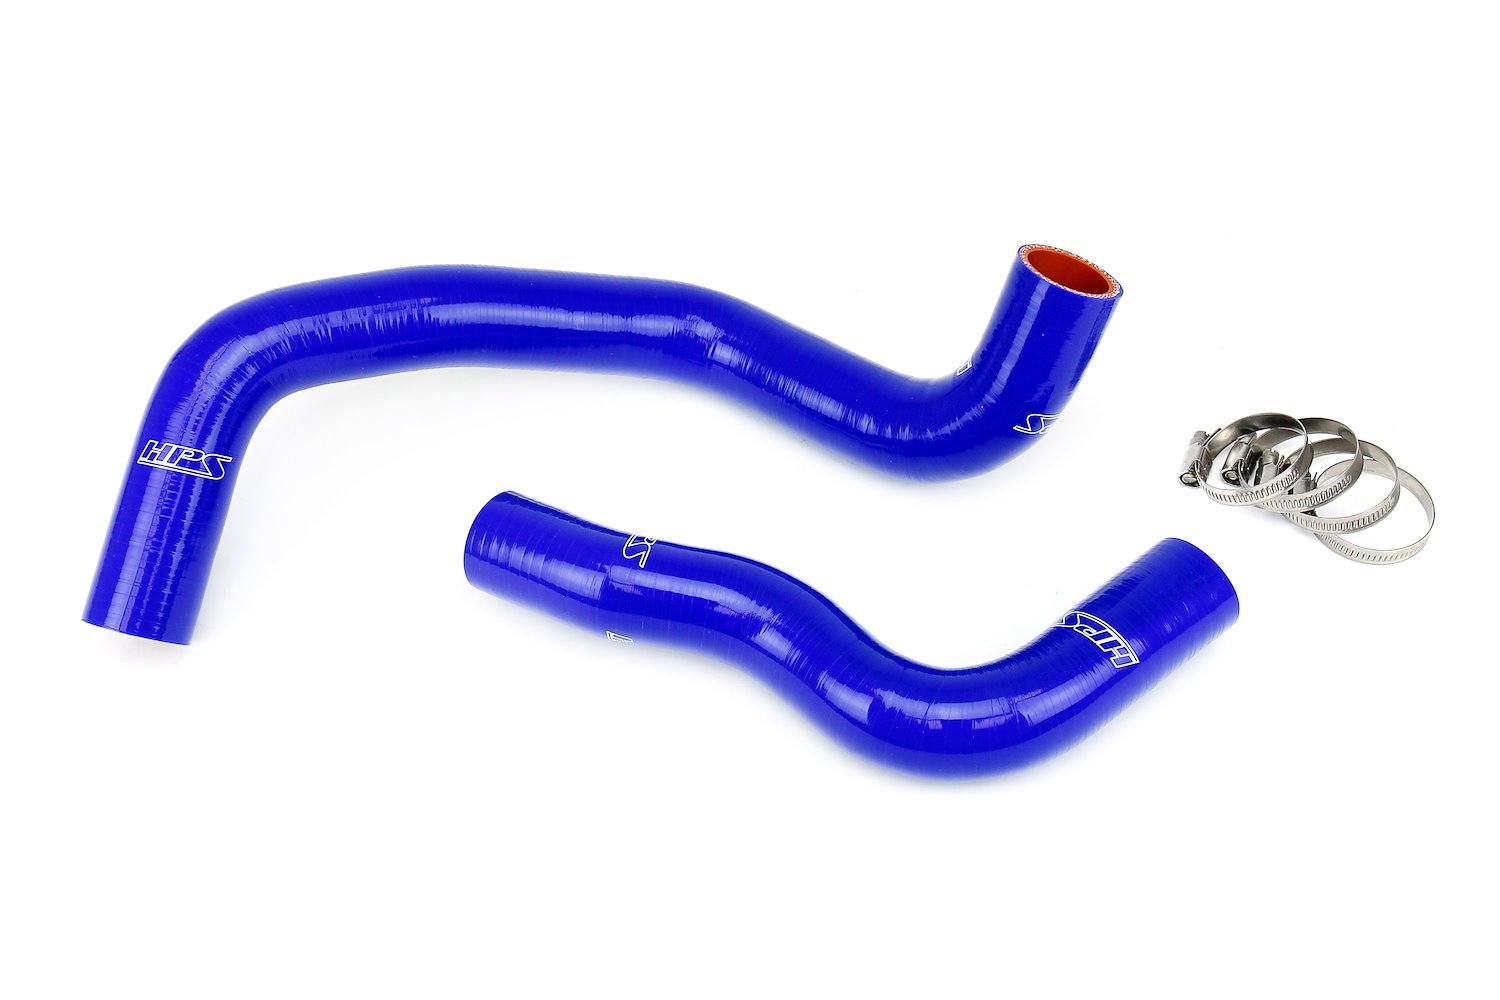 57-1833-BLUE Radiator Hose Kit, 3-Ply Reinforced Silicone, Replaces Rubber Radiator Coolant Hoses